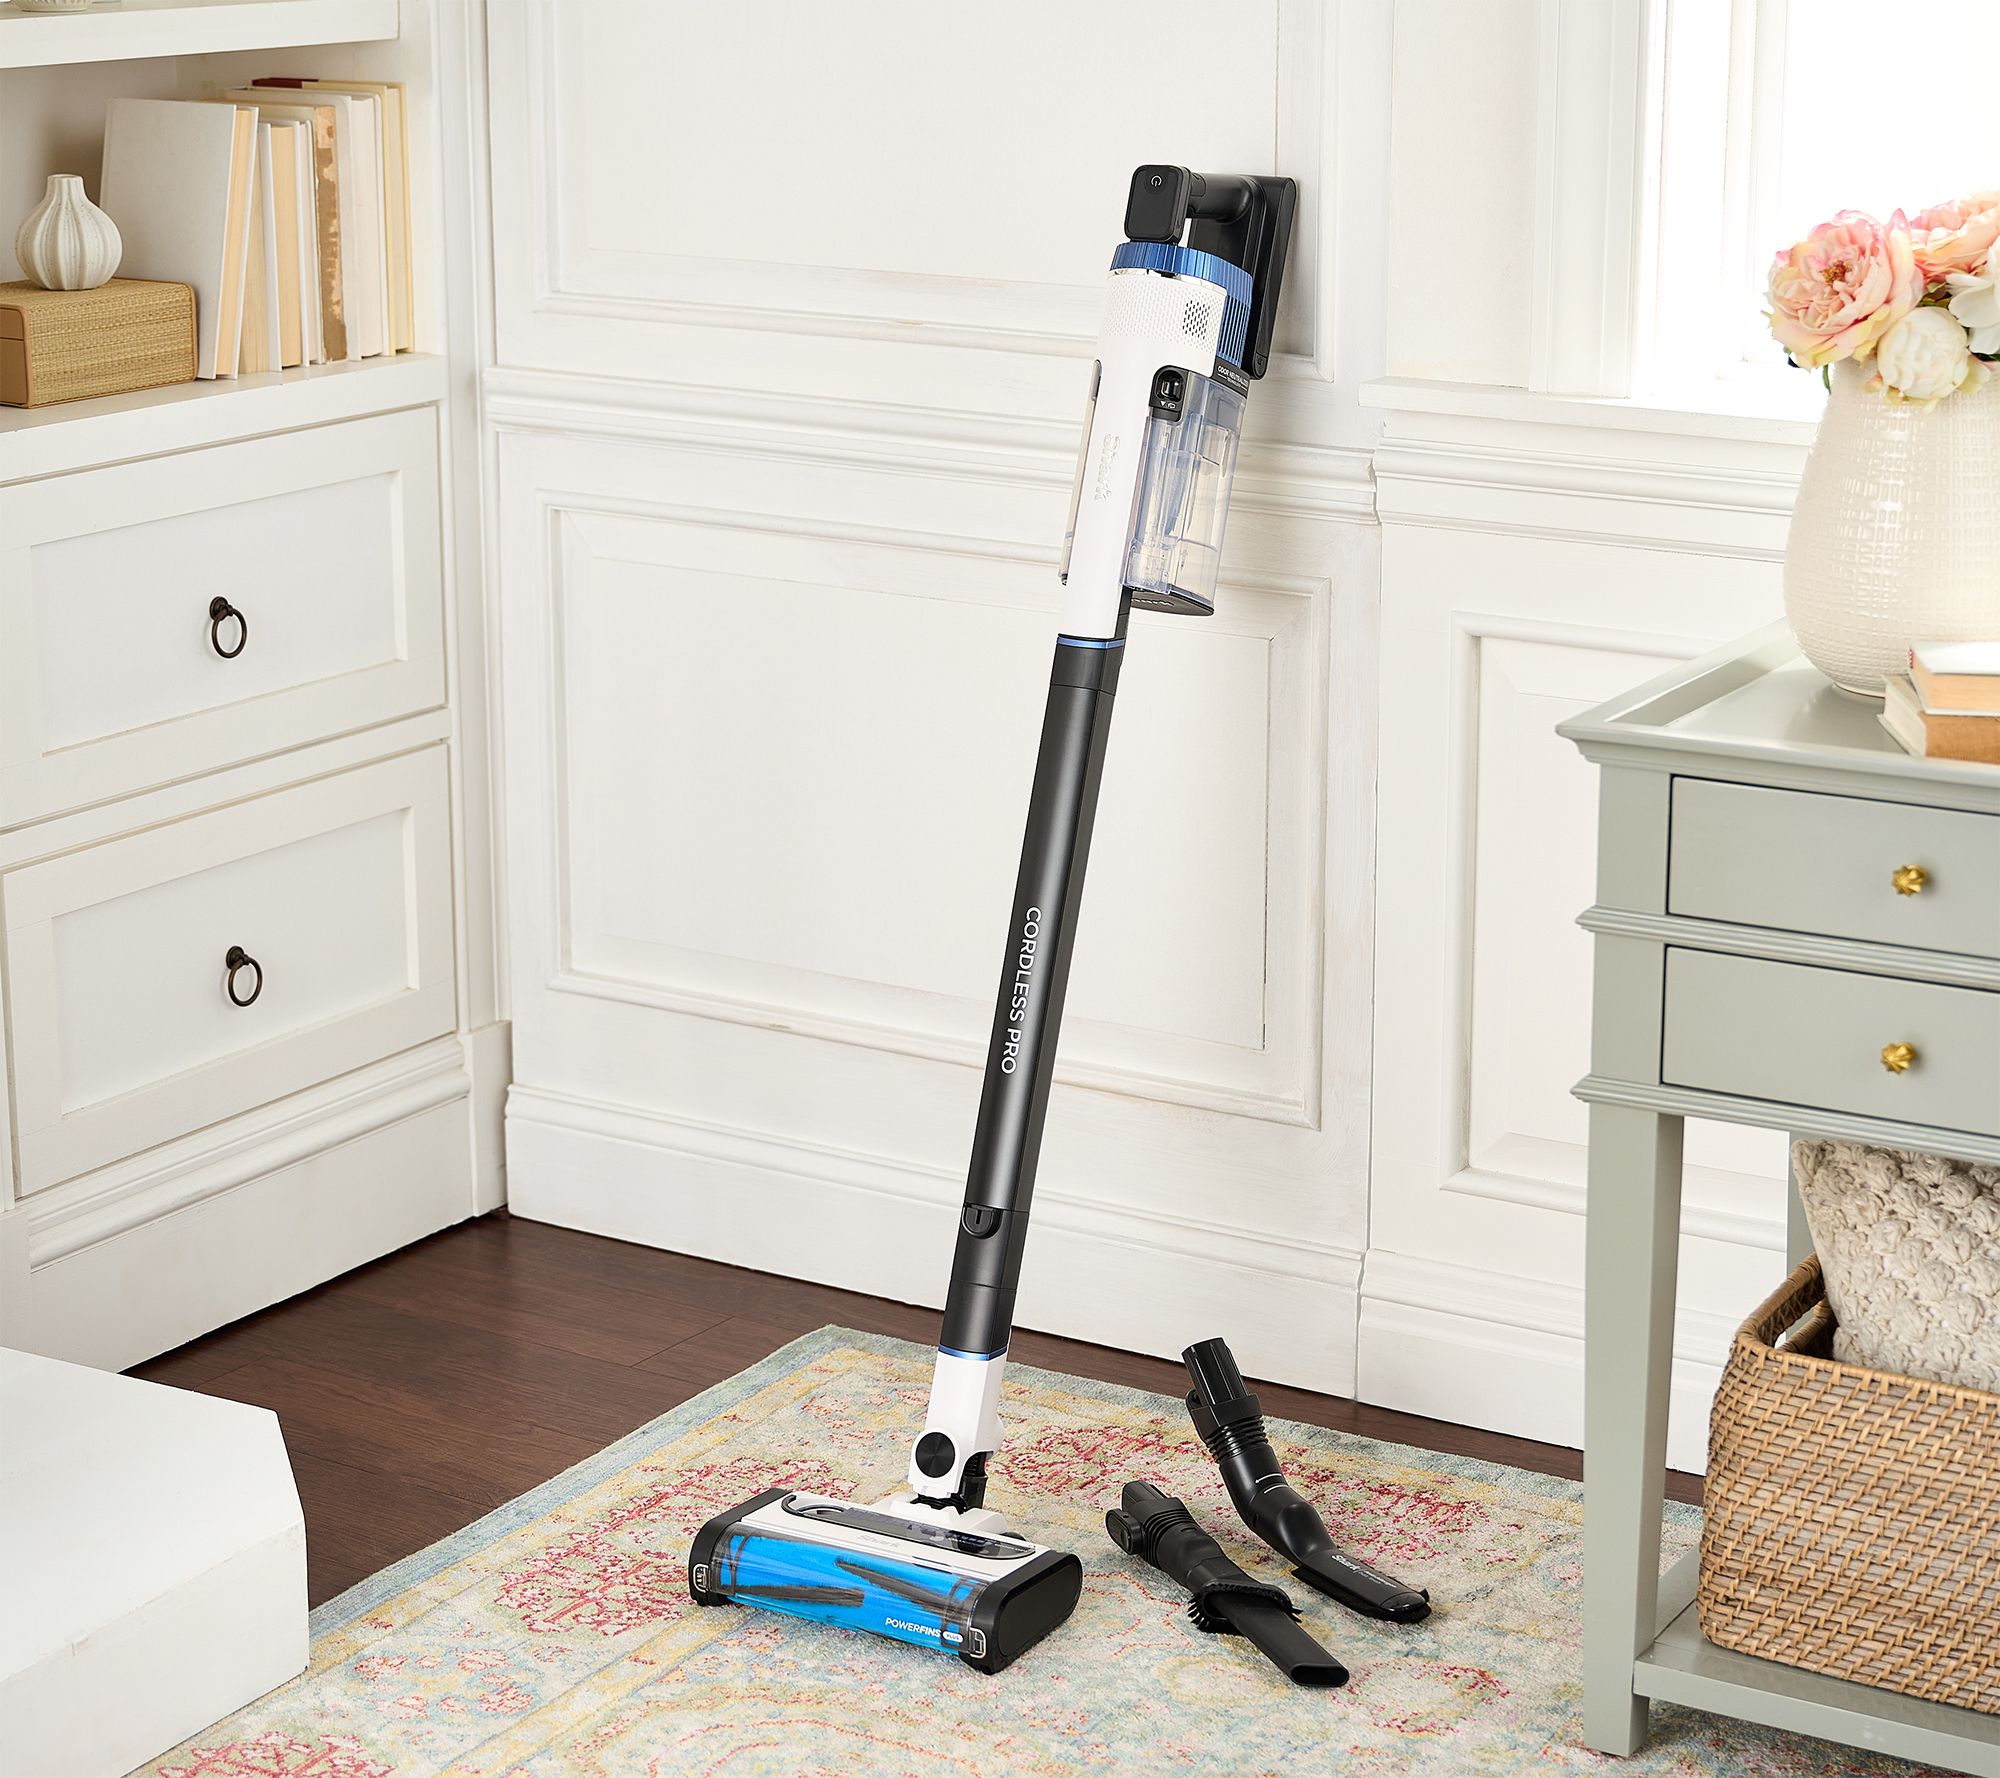 Shark Rechargeable Floor and Carpet Sweeper 